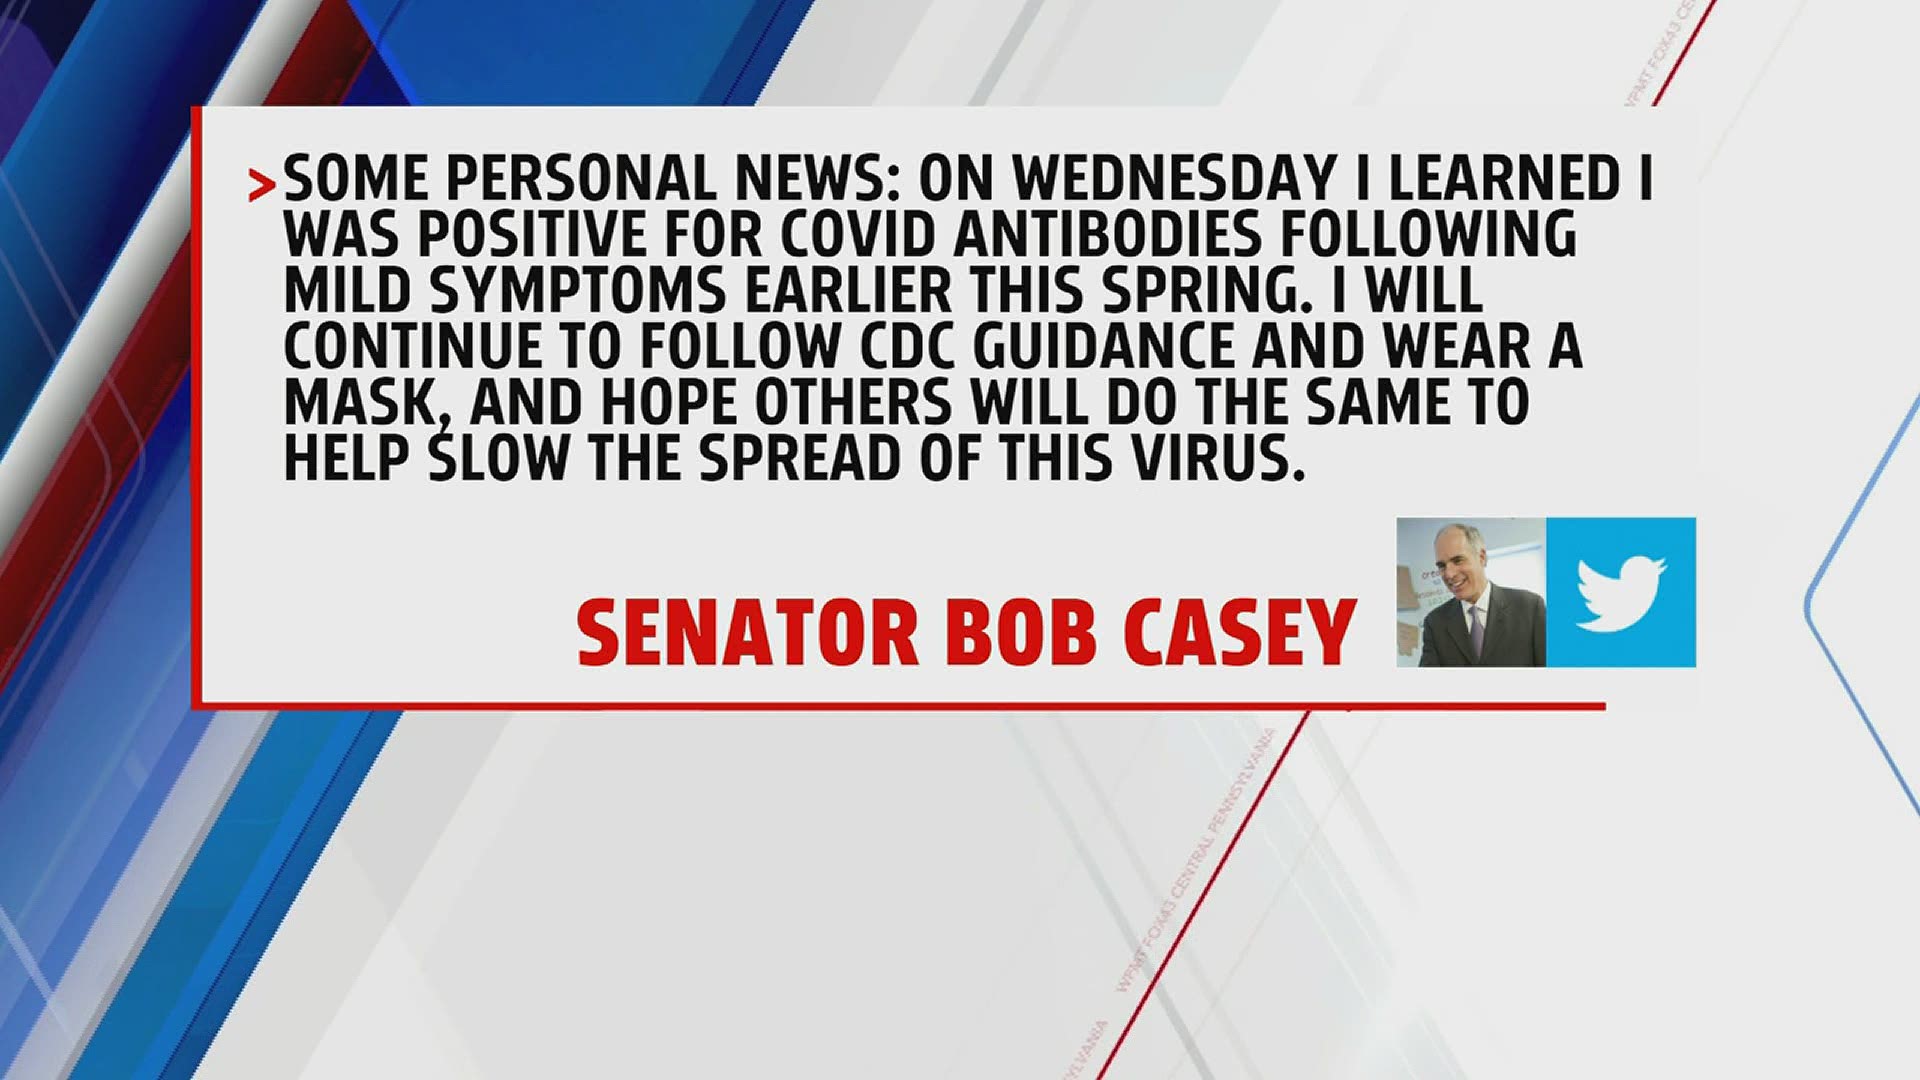 The Senator announced that he tested positive for COVID-19 antibodies following mild symptoms earlier this spring.